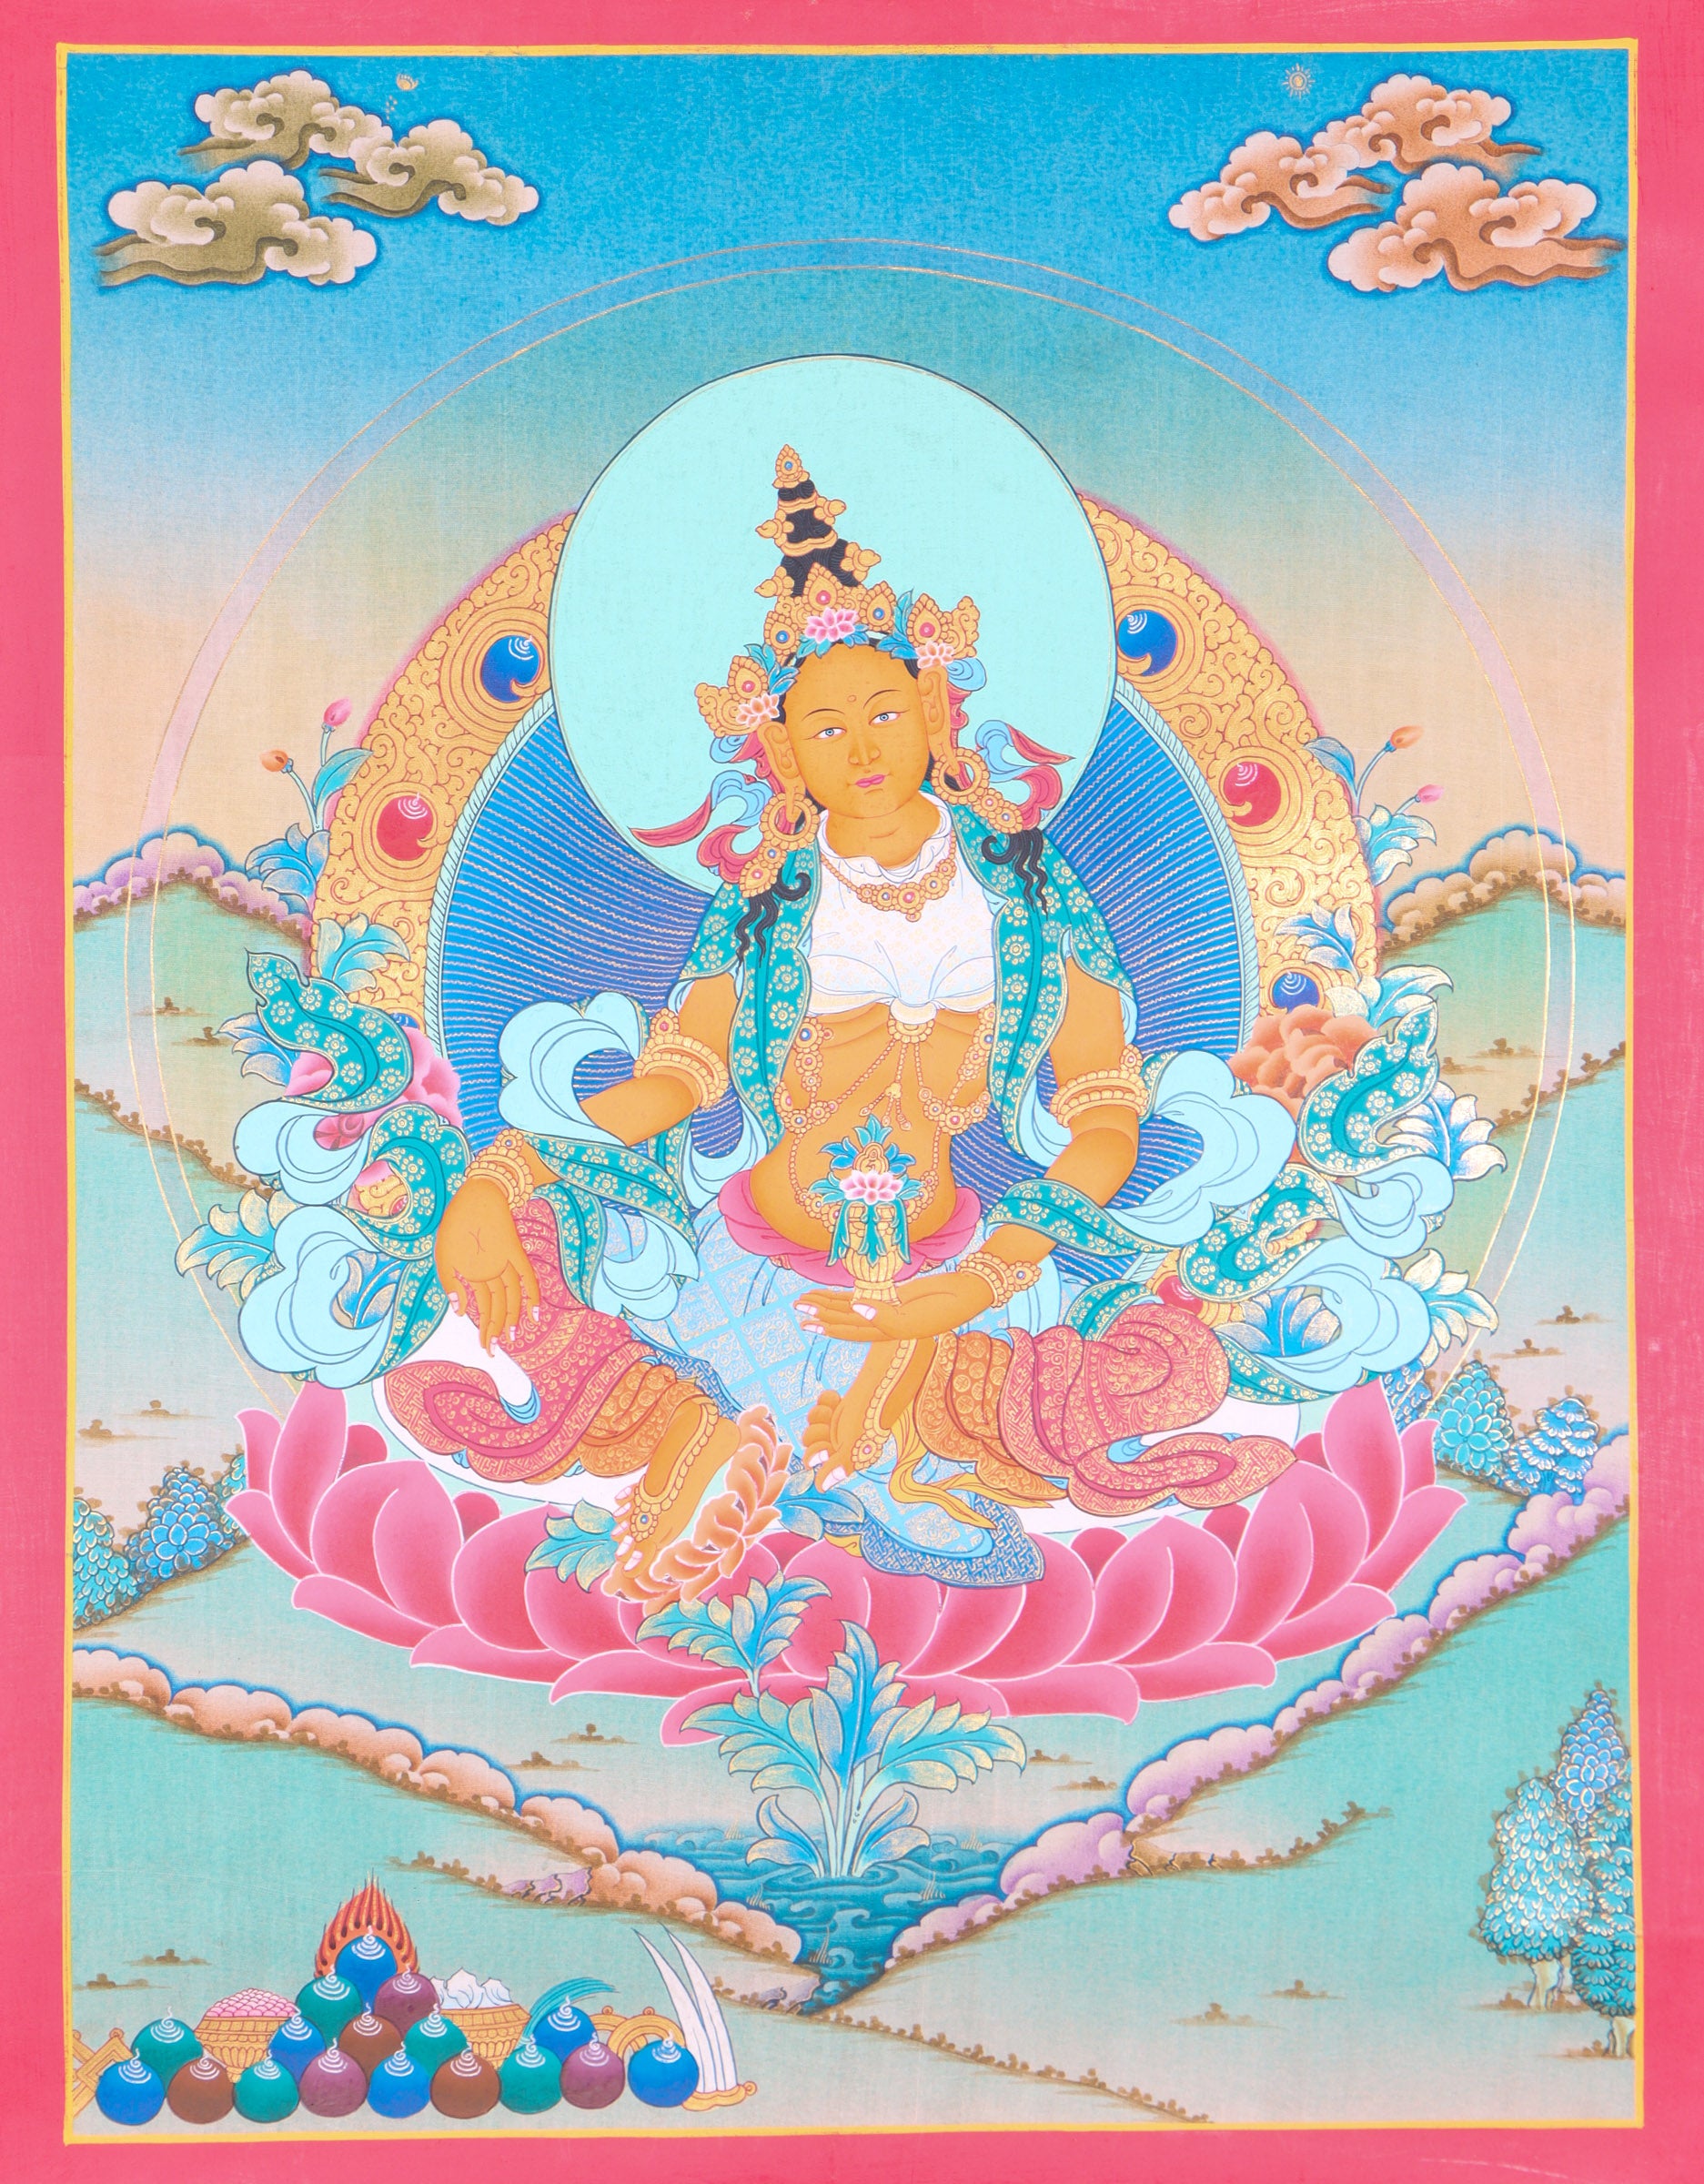 Yellow Tara Thangka Painting for Buddhist rituals, ceremonies and meditation practices